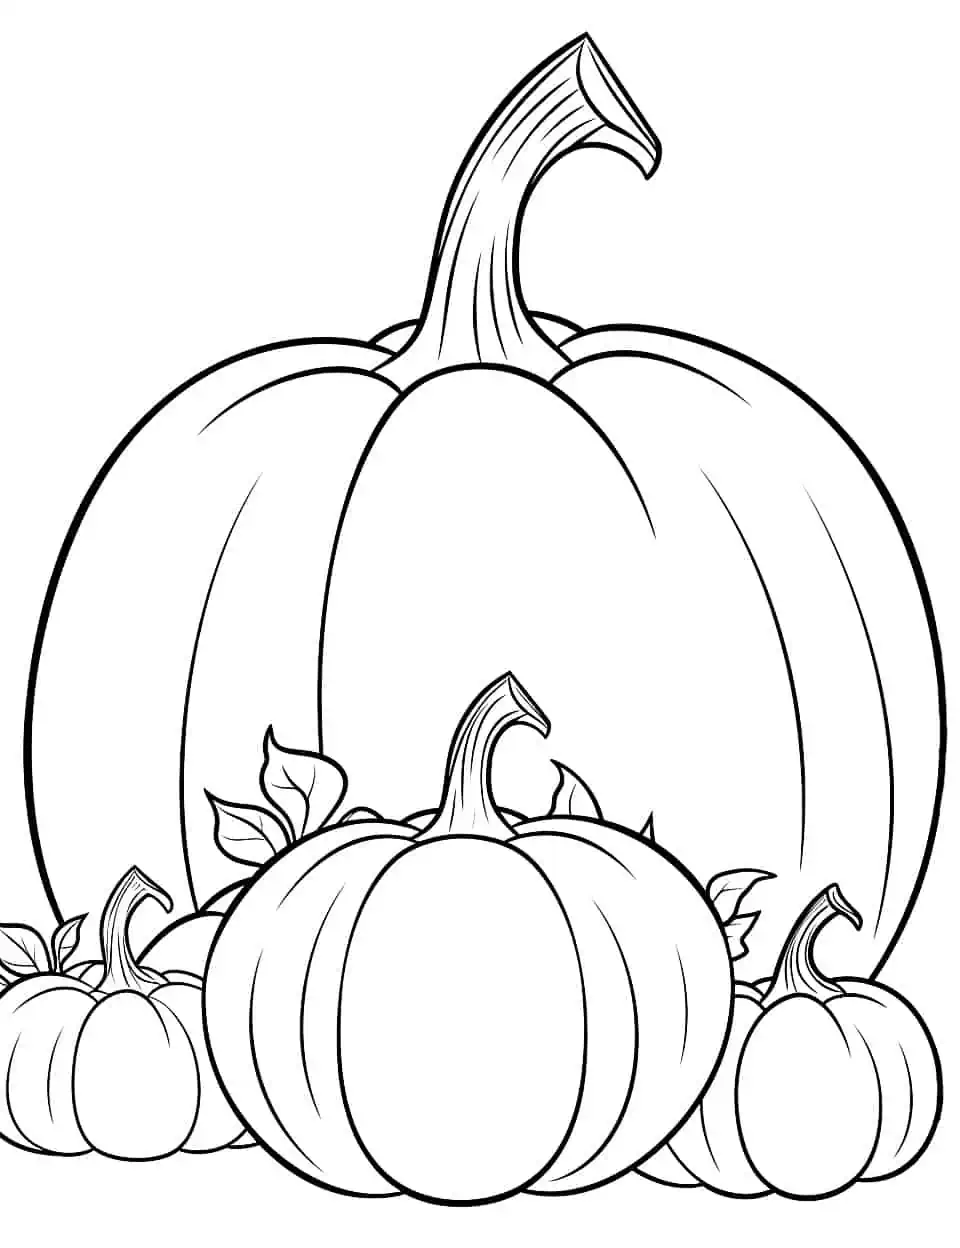 Preschool Learning Pumpkins Pumpkin Coloring Page - A coloring page featuring pumpkins of various sizes, designed to help preschoolers understand scale and size.